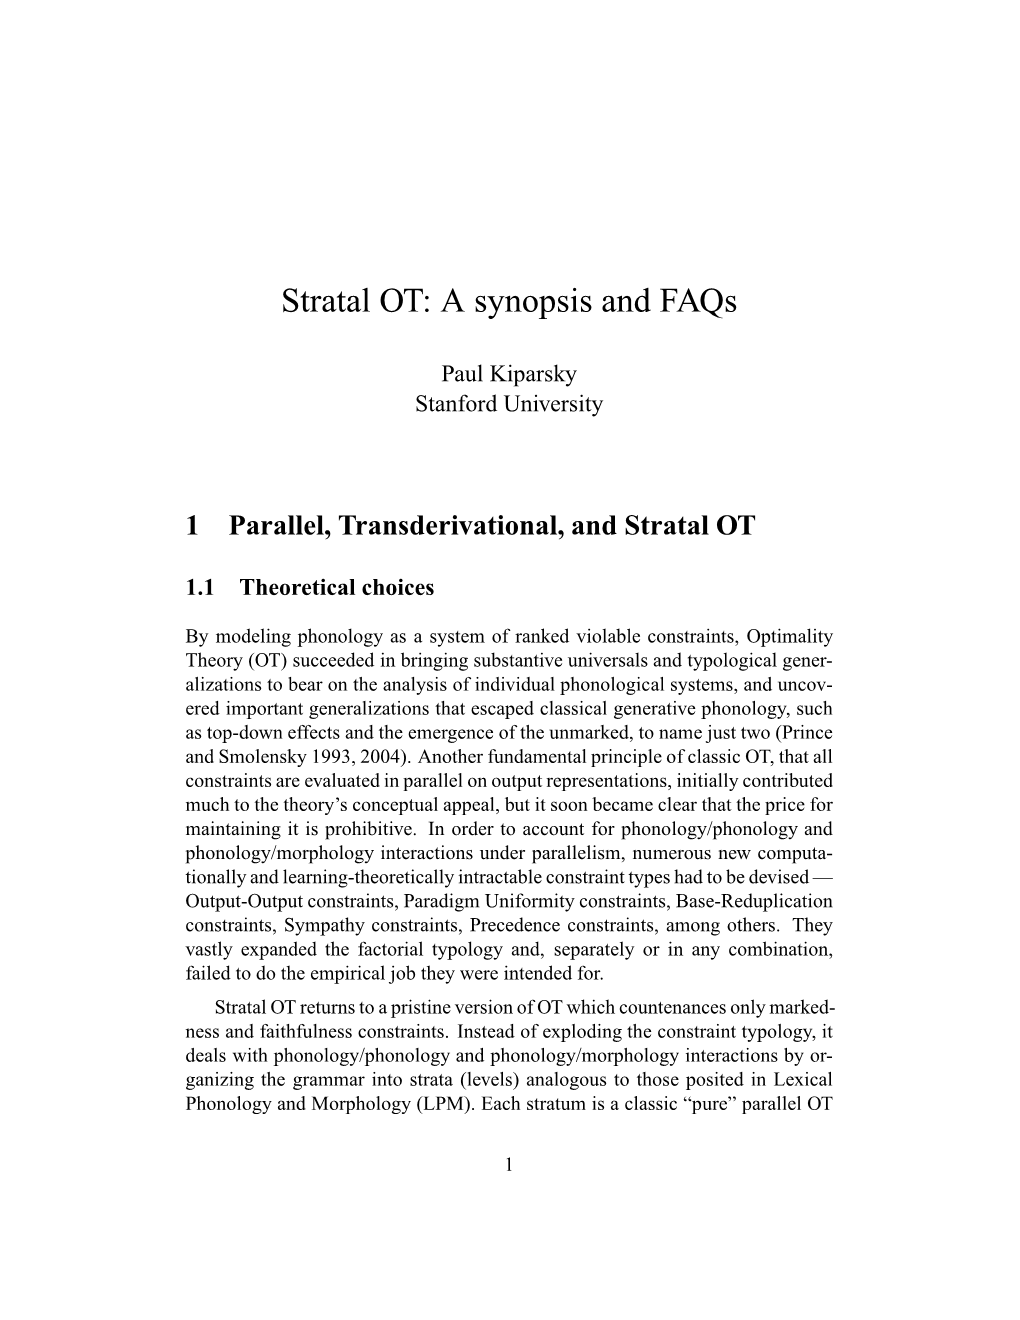 Stratal OT: a Synopsis and Faqs